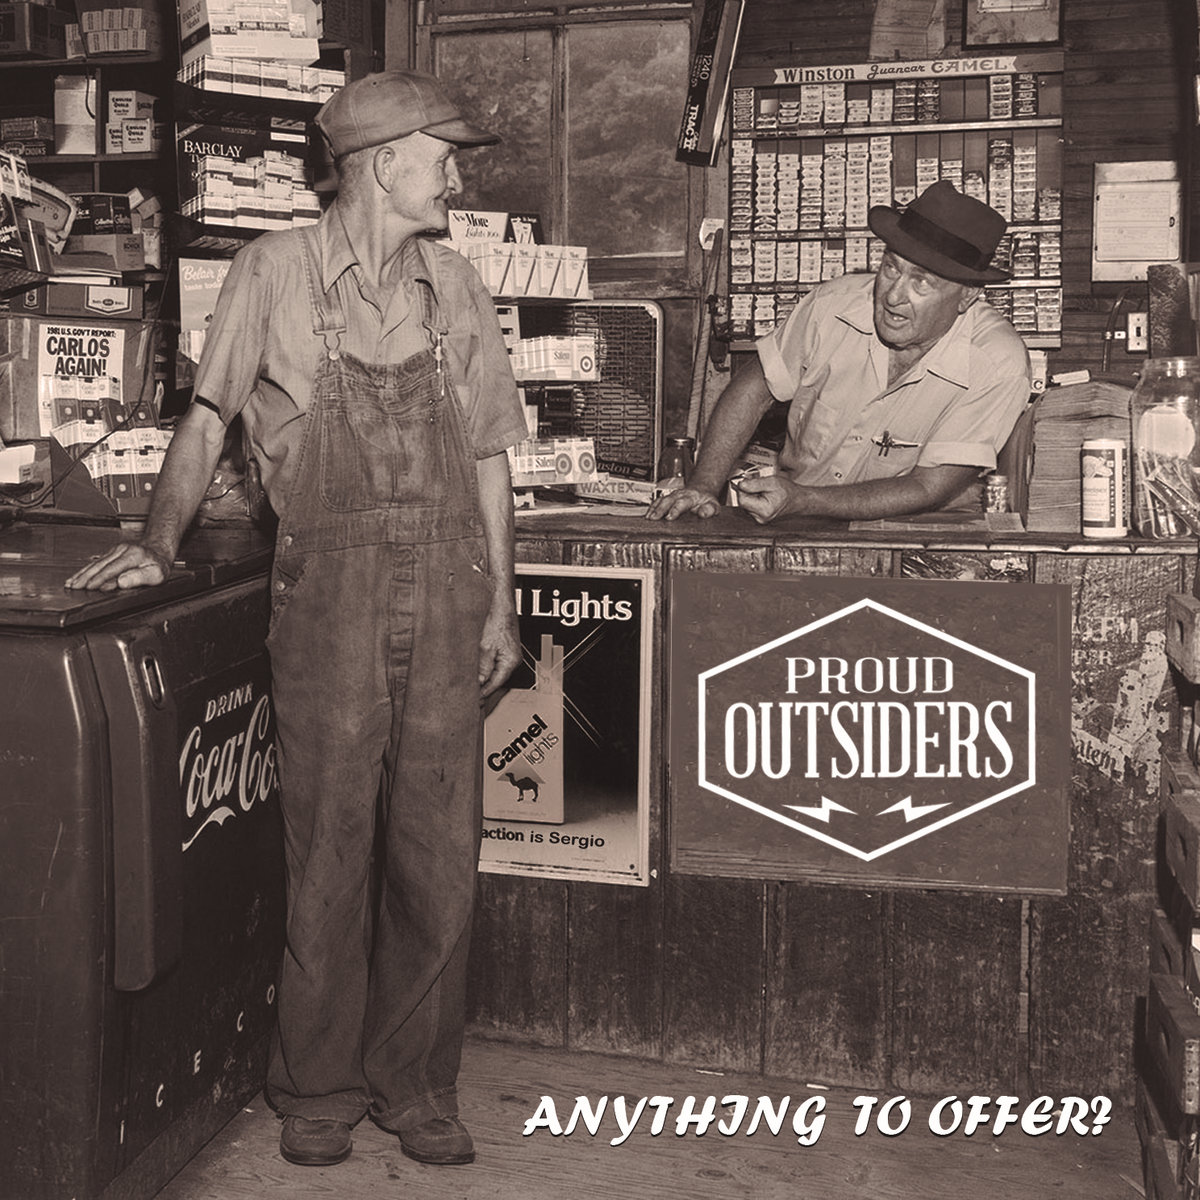 Proud Outsiders publica su primer trabajo "Anything To Offer?"